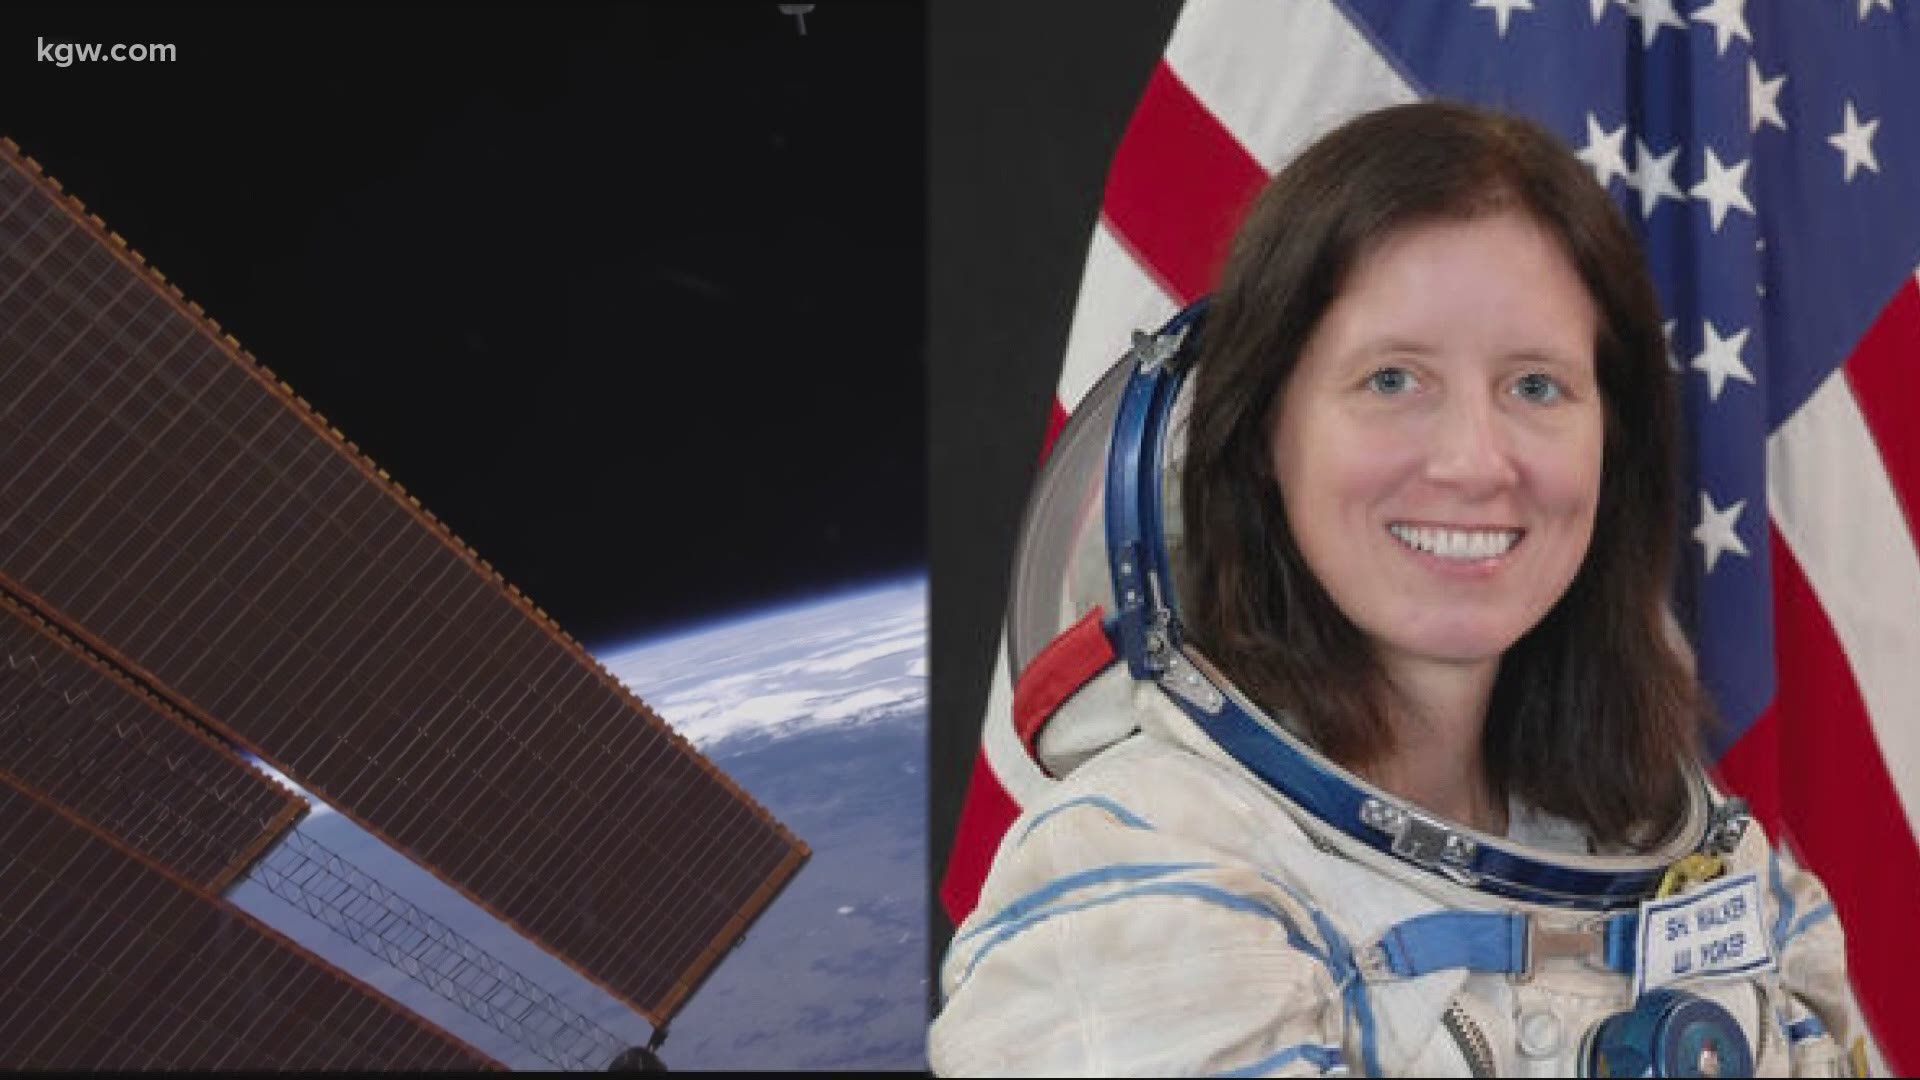 Students at Oregon Charter Academy spoke to an astronaut on the International Space Station and had ten minutes to ask their most pressing questions.